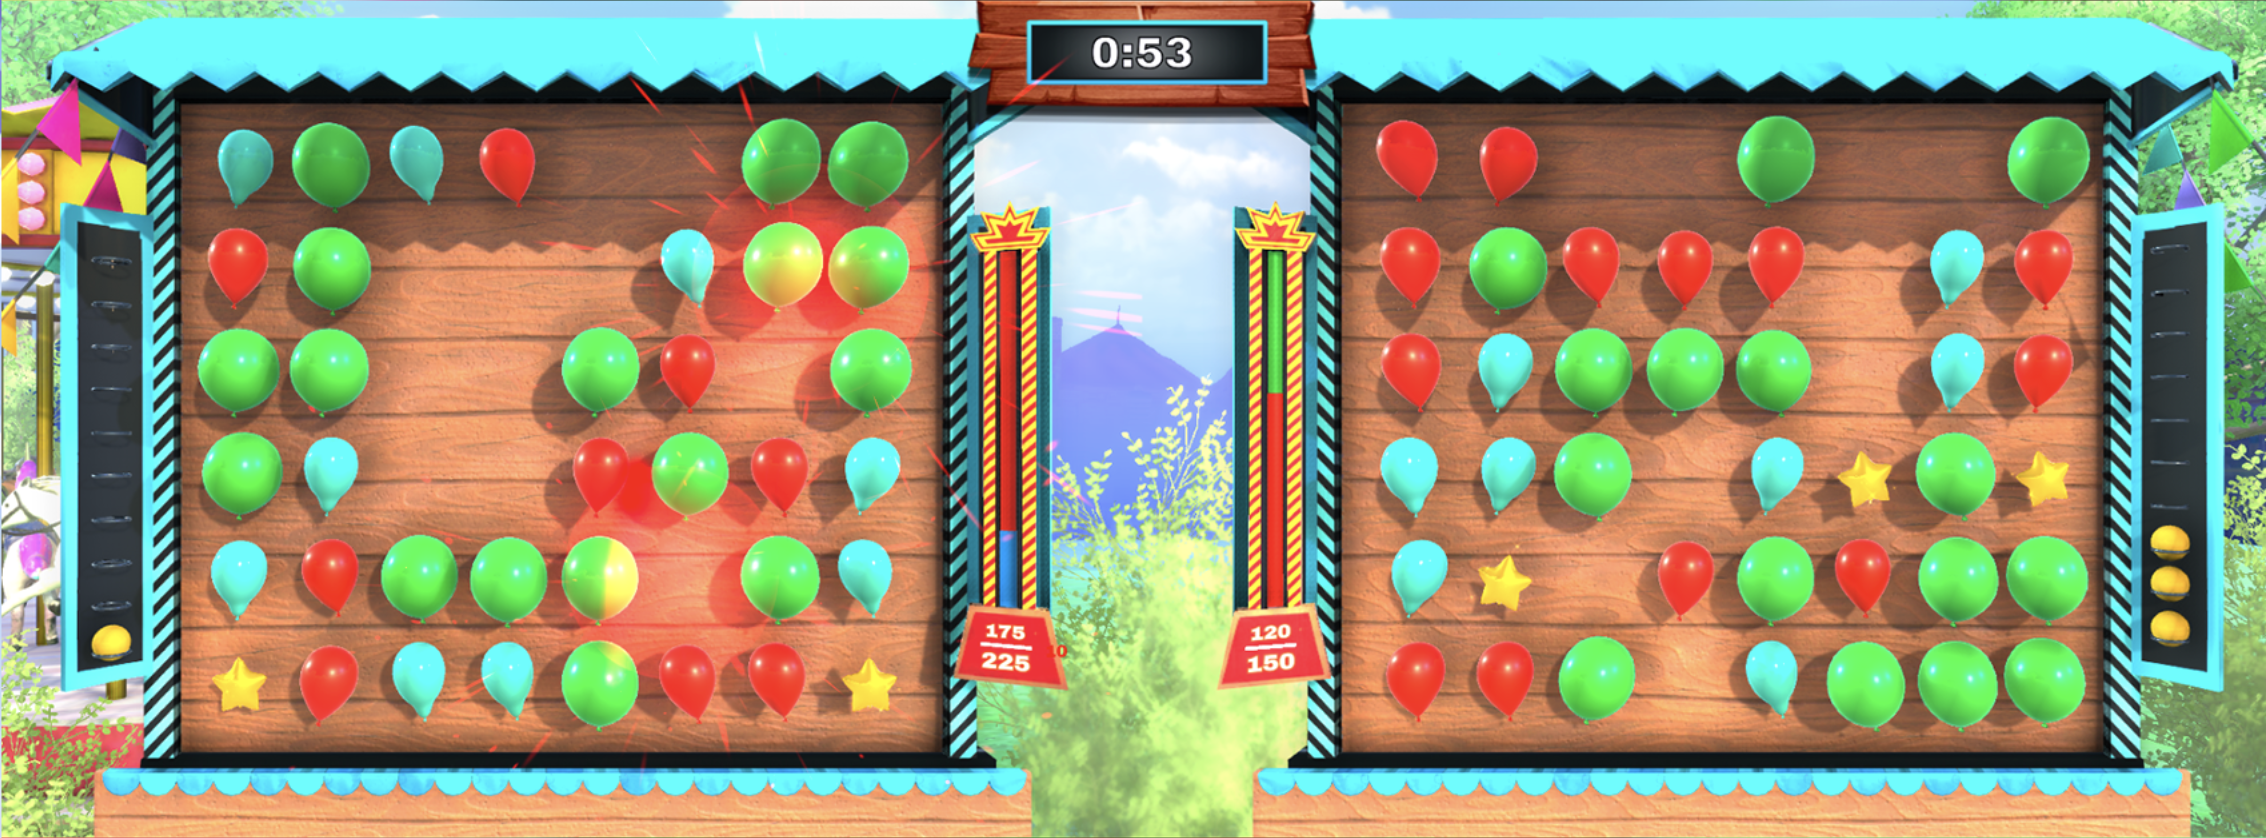 Balloon pop gameplay picture 2 players